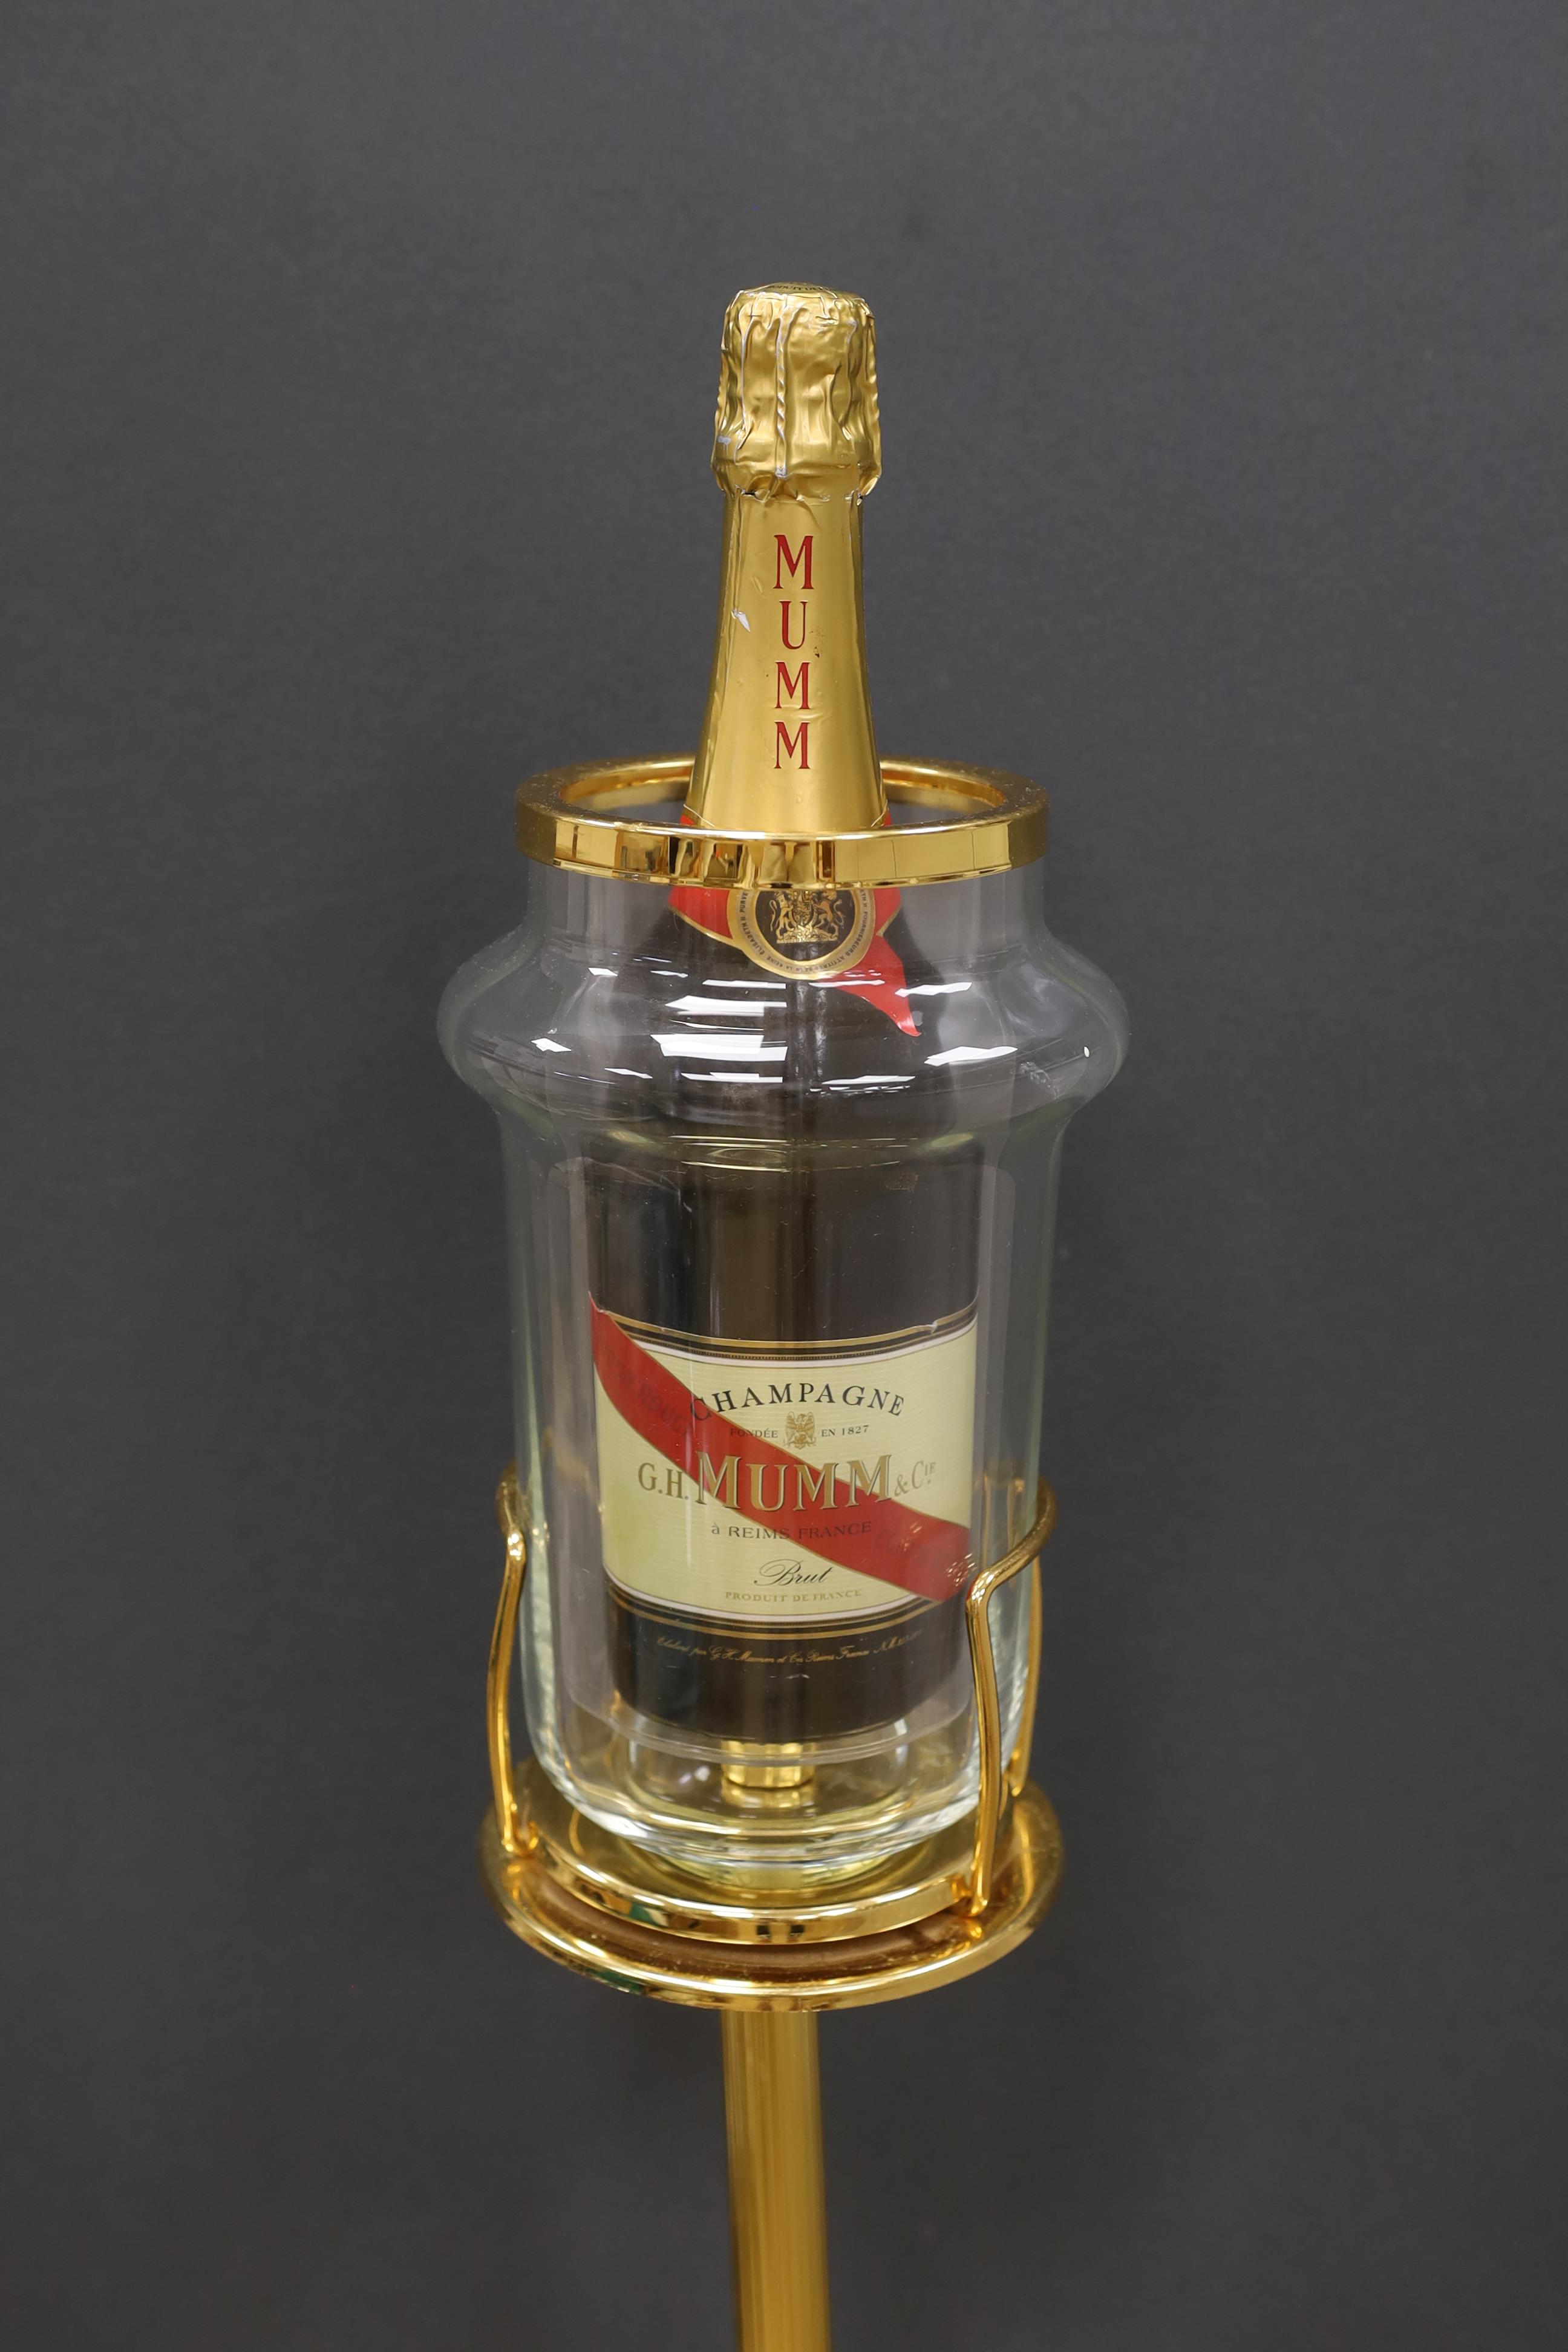 A wine cooler on pedestal, marked Faugeron, Paris, with a bottle of Mumm Champagne, 89cm high. Condition- fair, base of bottle holder needs straightening.